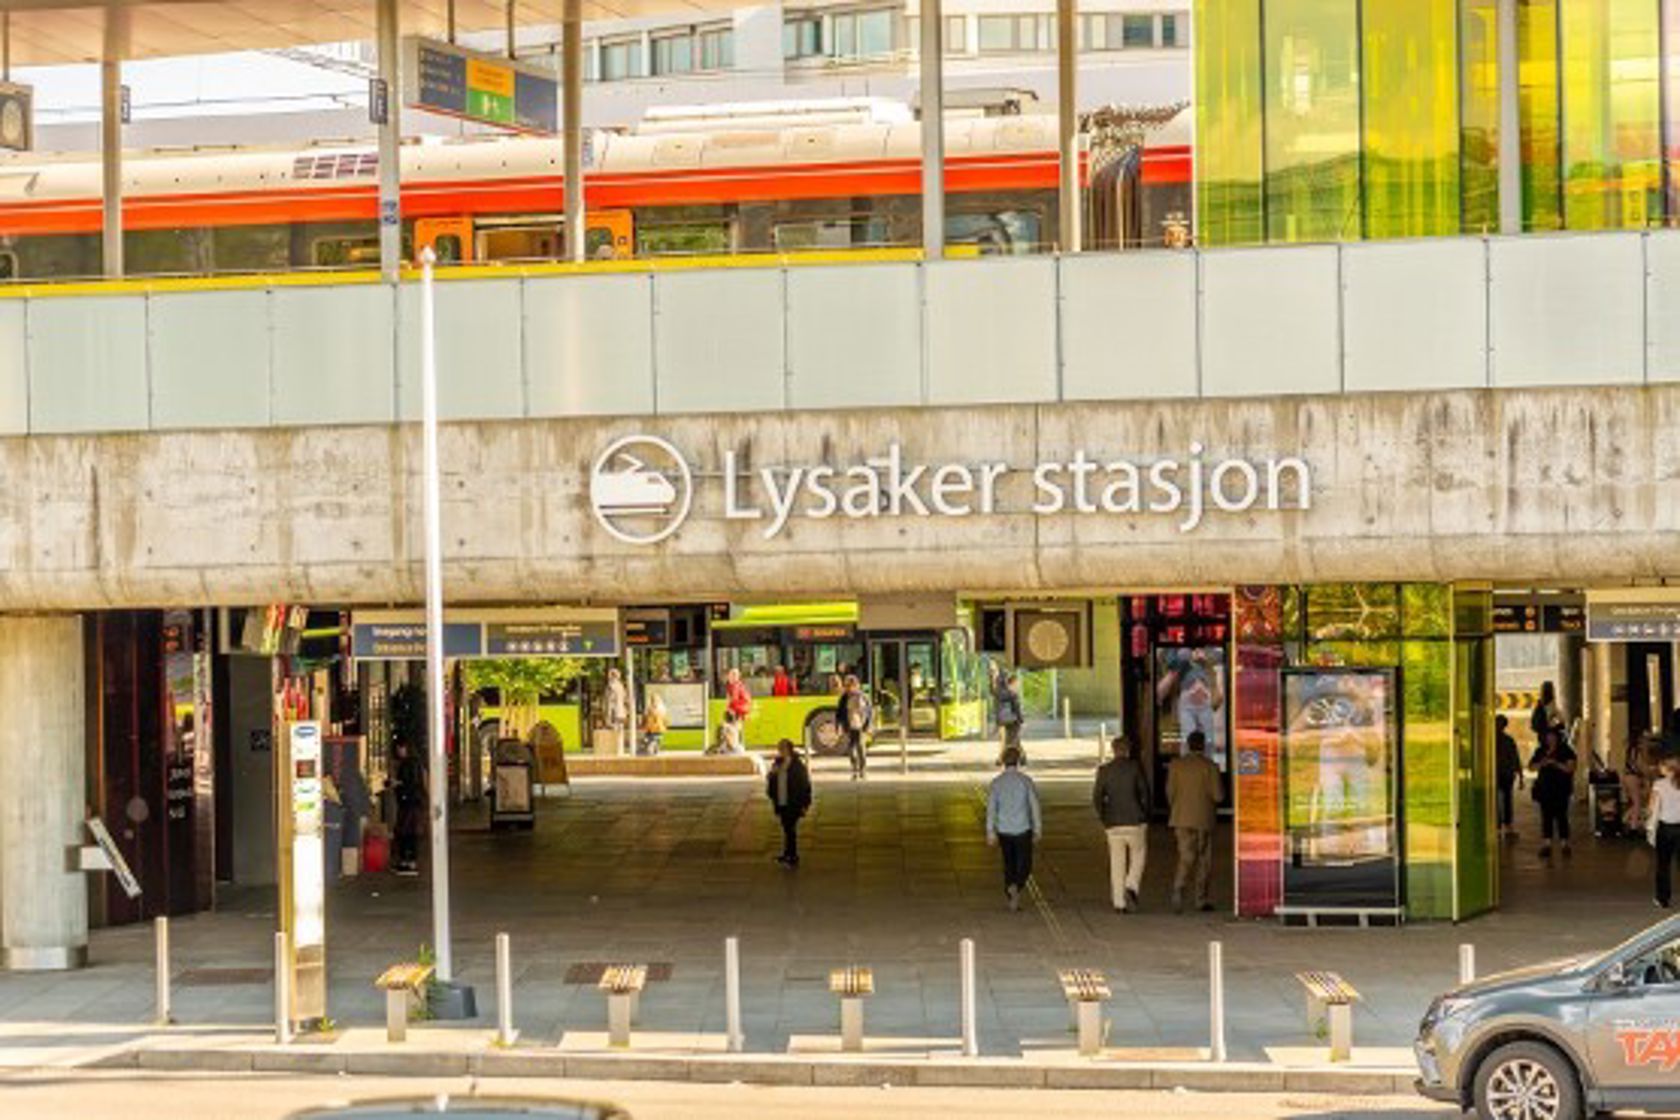 Exterior view of Lysaker station